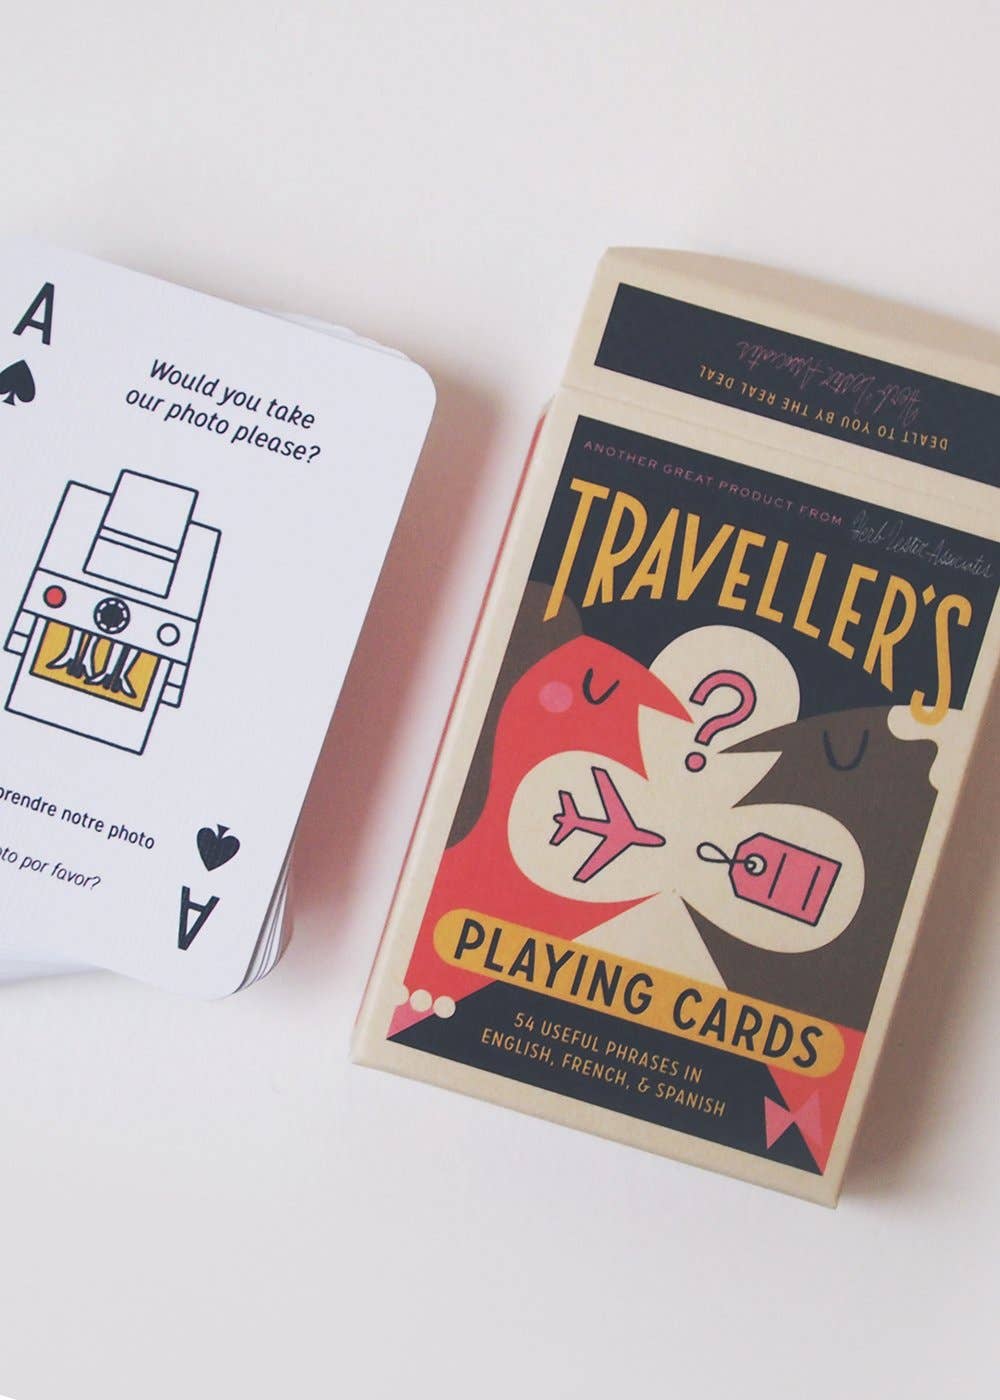 Traveller's Playing Cards - Travel Spanish & French Phrases